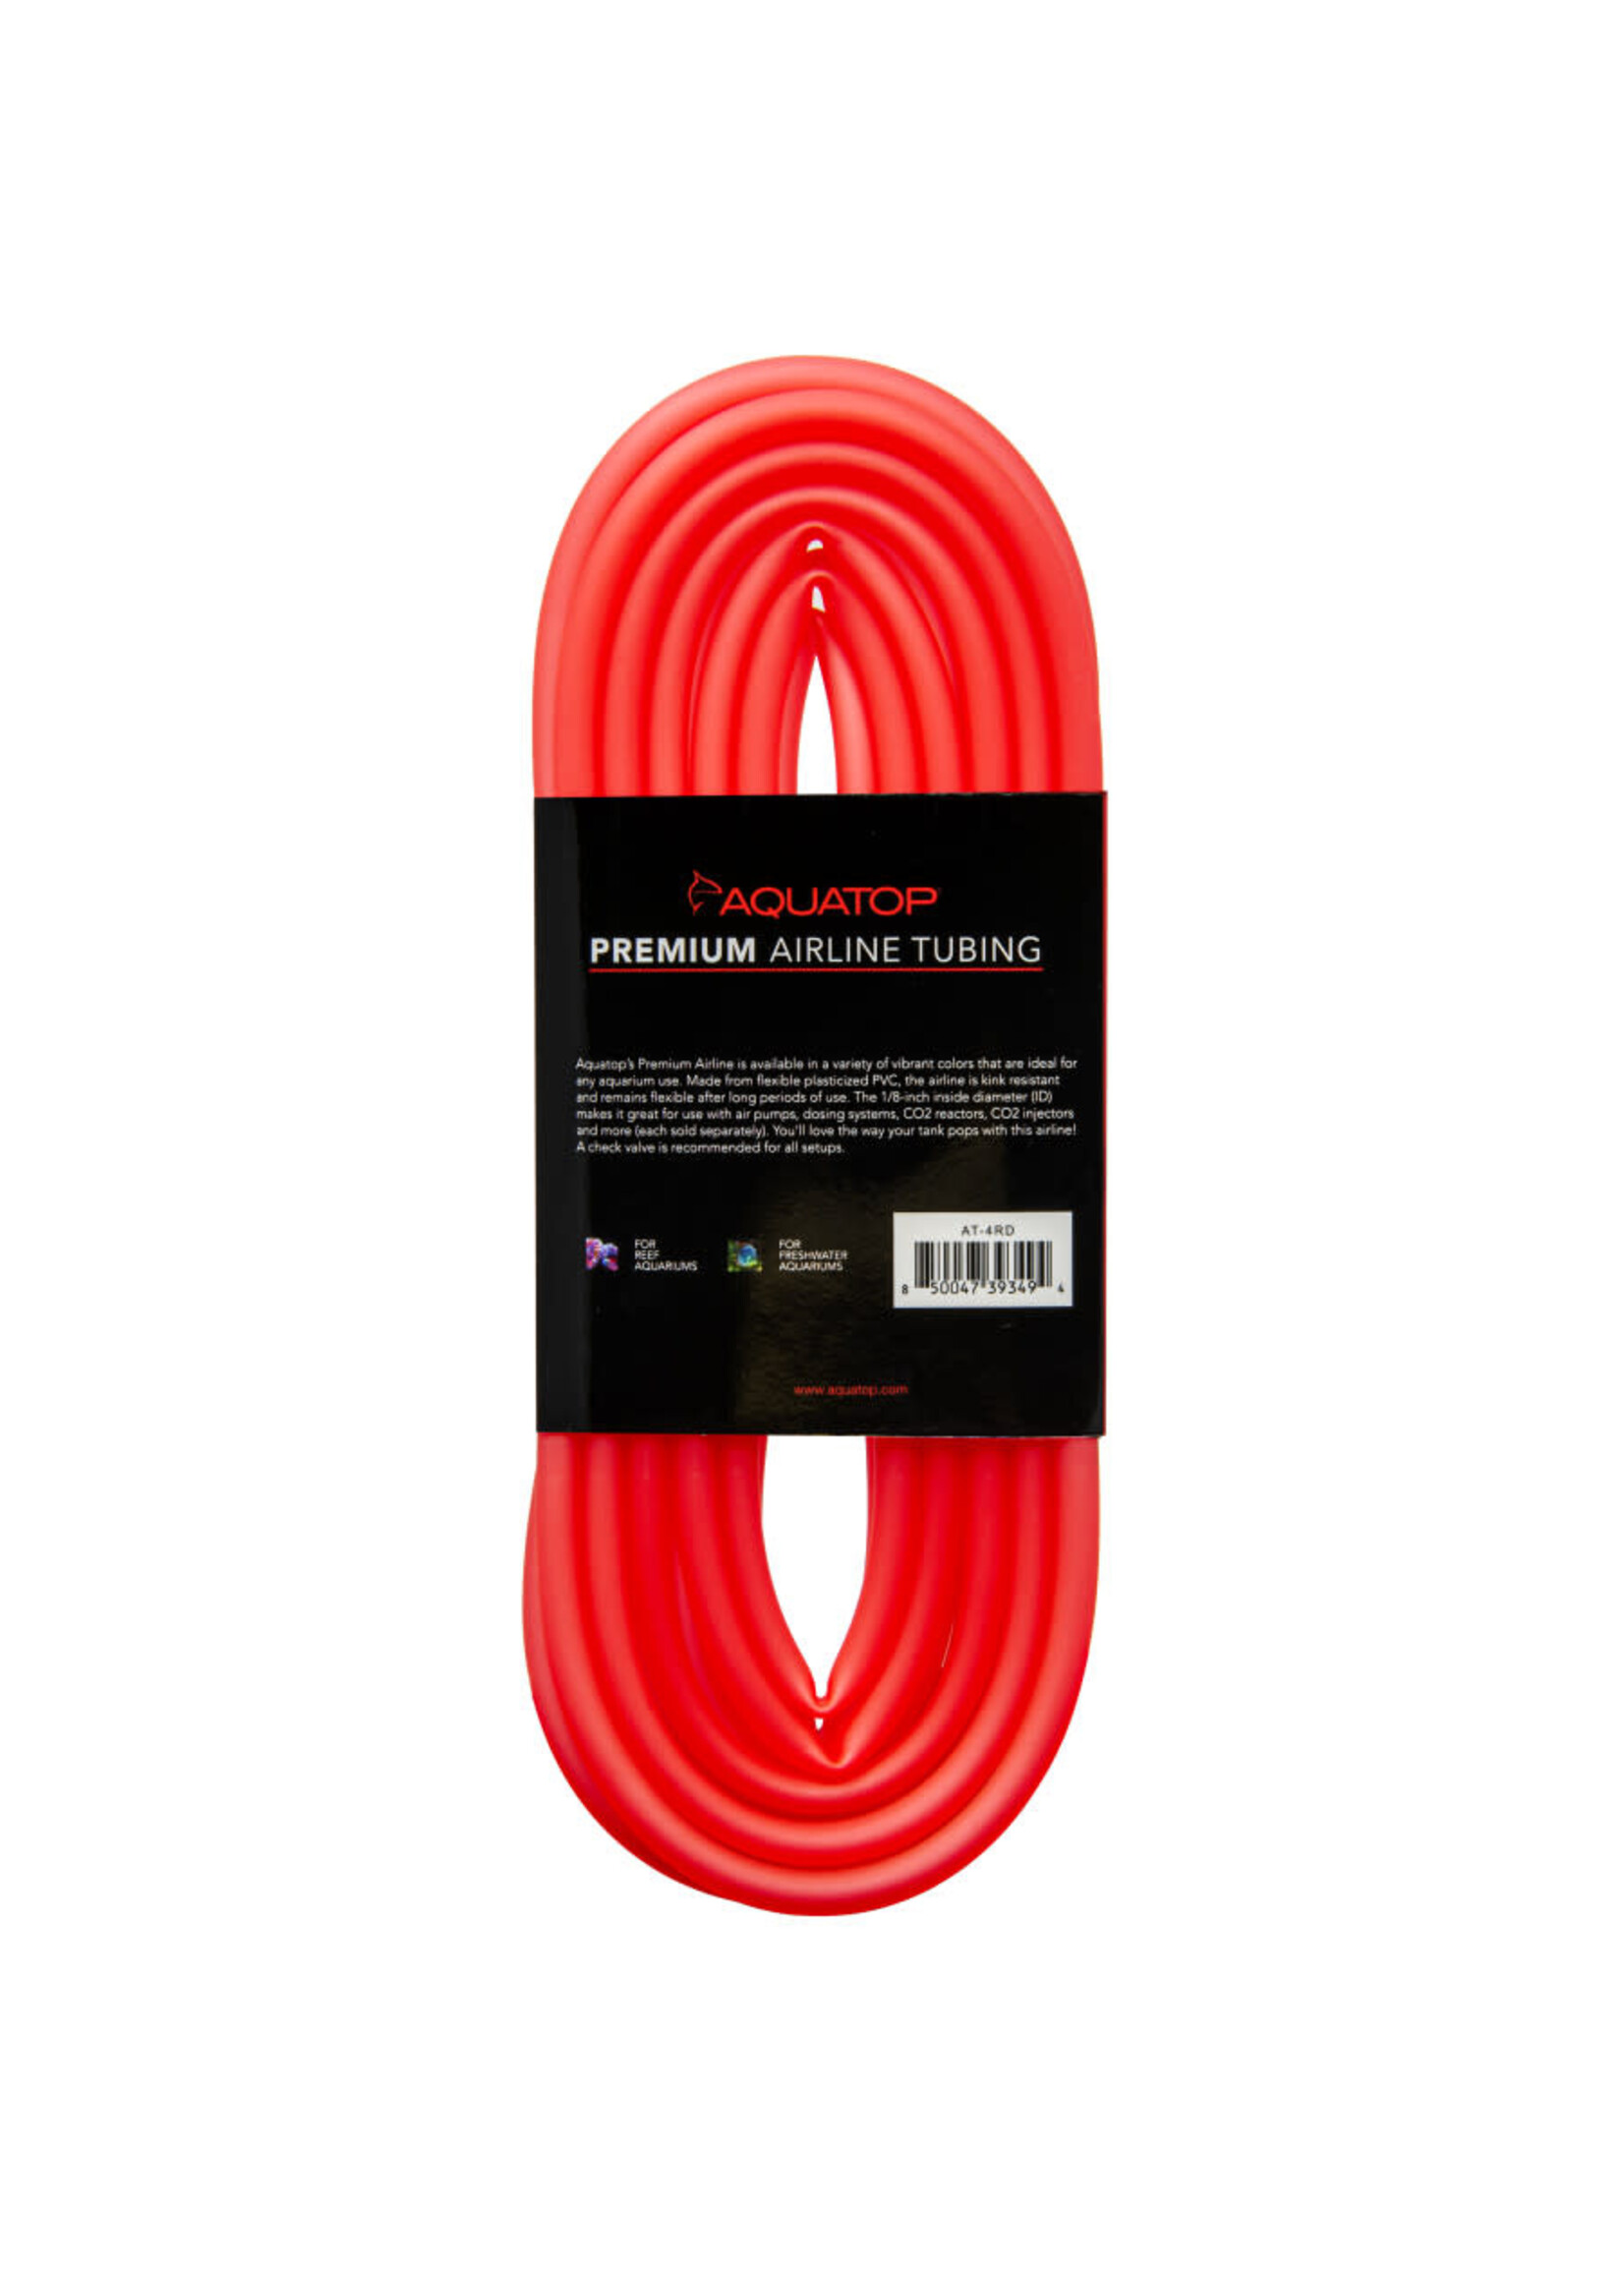 Aquatop AIRLINE TUBING RED 13 FT